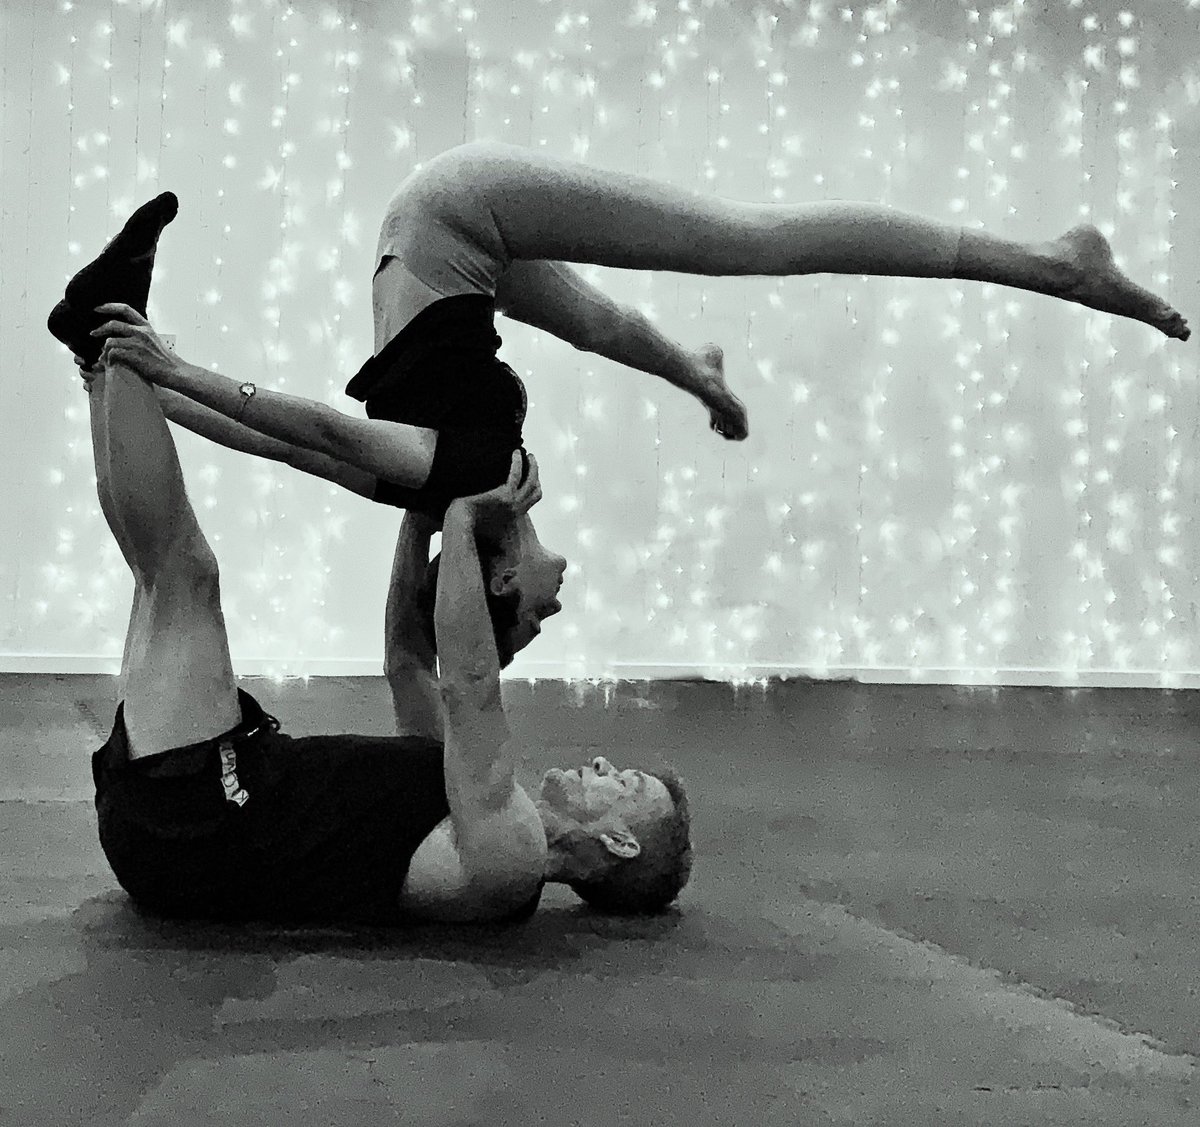 I have absolutely no desire to fit in ✊🏻 
#acroyoga #acro #yoga #partnerworkout #training #workout #excercise #strengthtraining #strength #strong #balance #calisthenics #fit #fitness #fitnessmotivation #blackandwhite #healthylifestyle #health #healthyliving #healthy #wellness